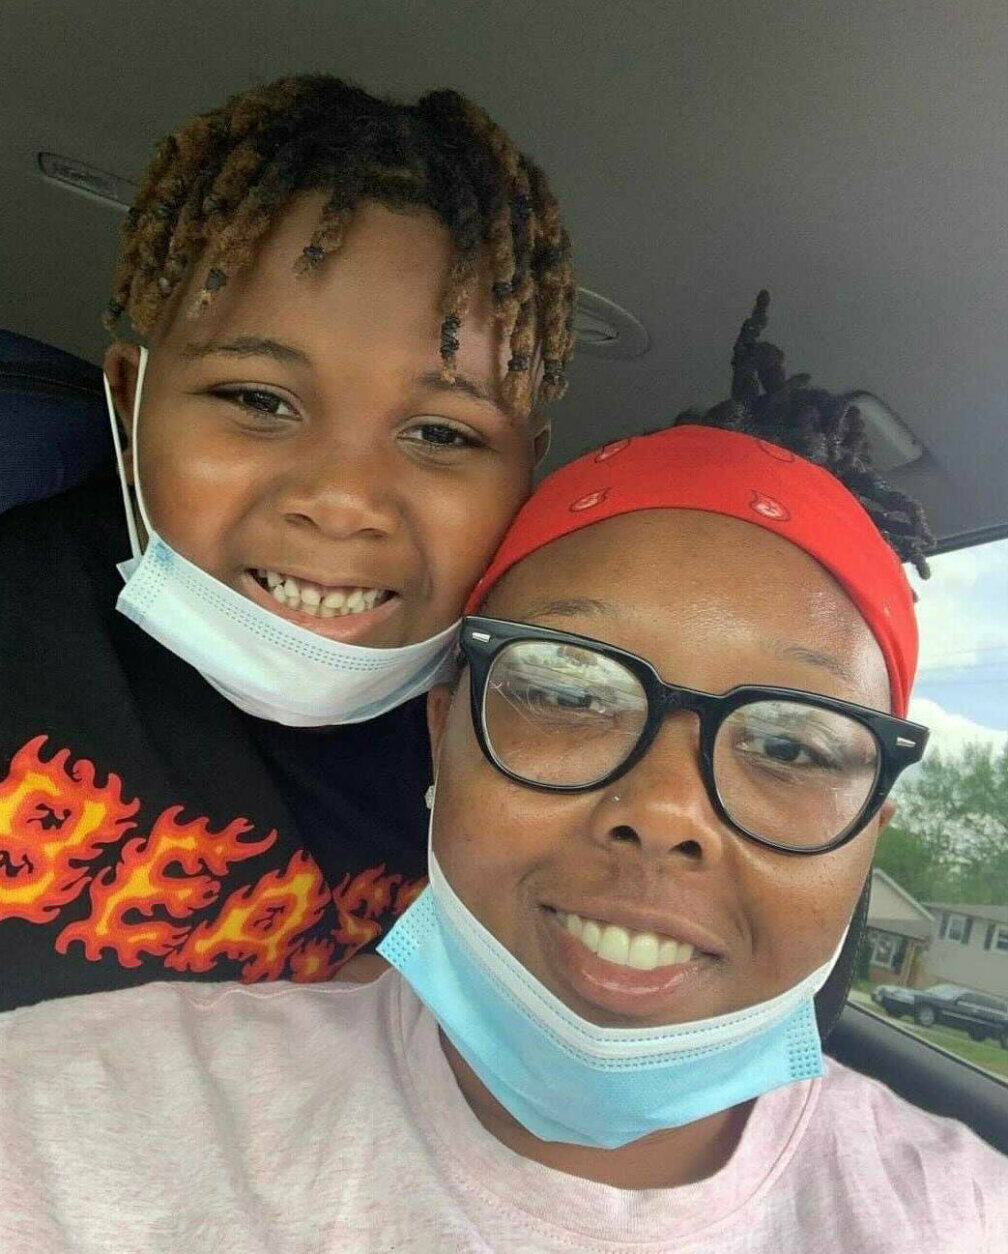 Peyton (P.J.) Evans 8, pictured with his mother, Tiffani Evans, was killed by stray bullet that entered a relative's home on Tuesday, Aug. 24, 2021, in Landover, Maryland. (Courtesy/Antoine Dotson)